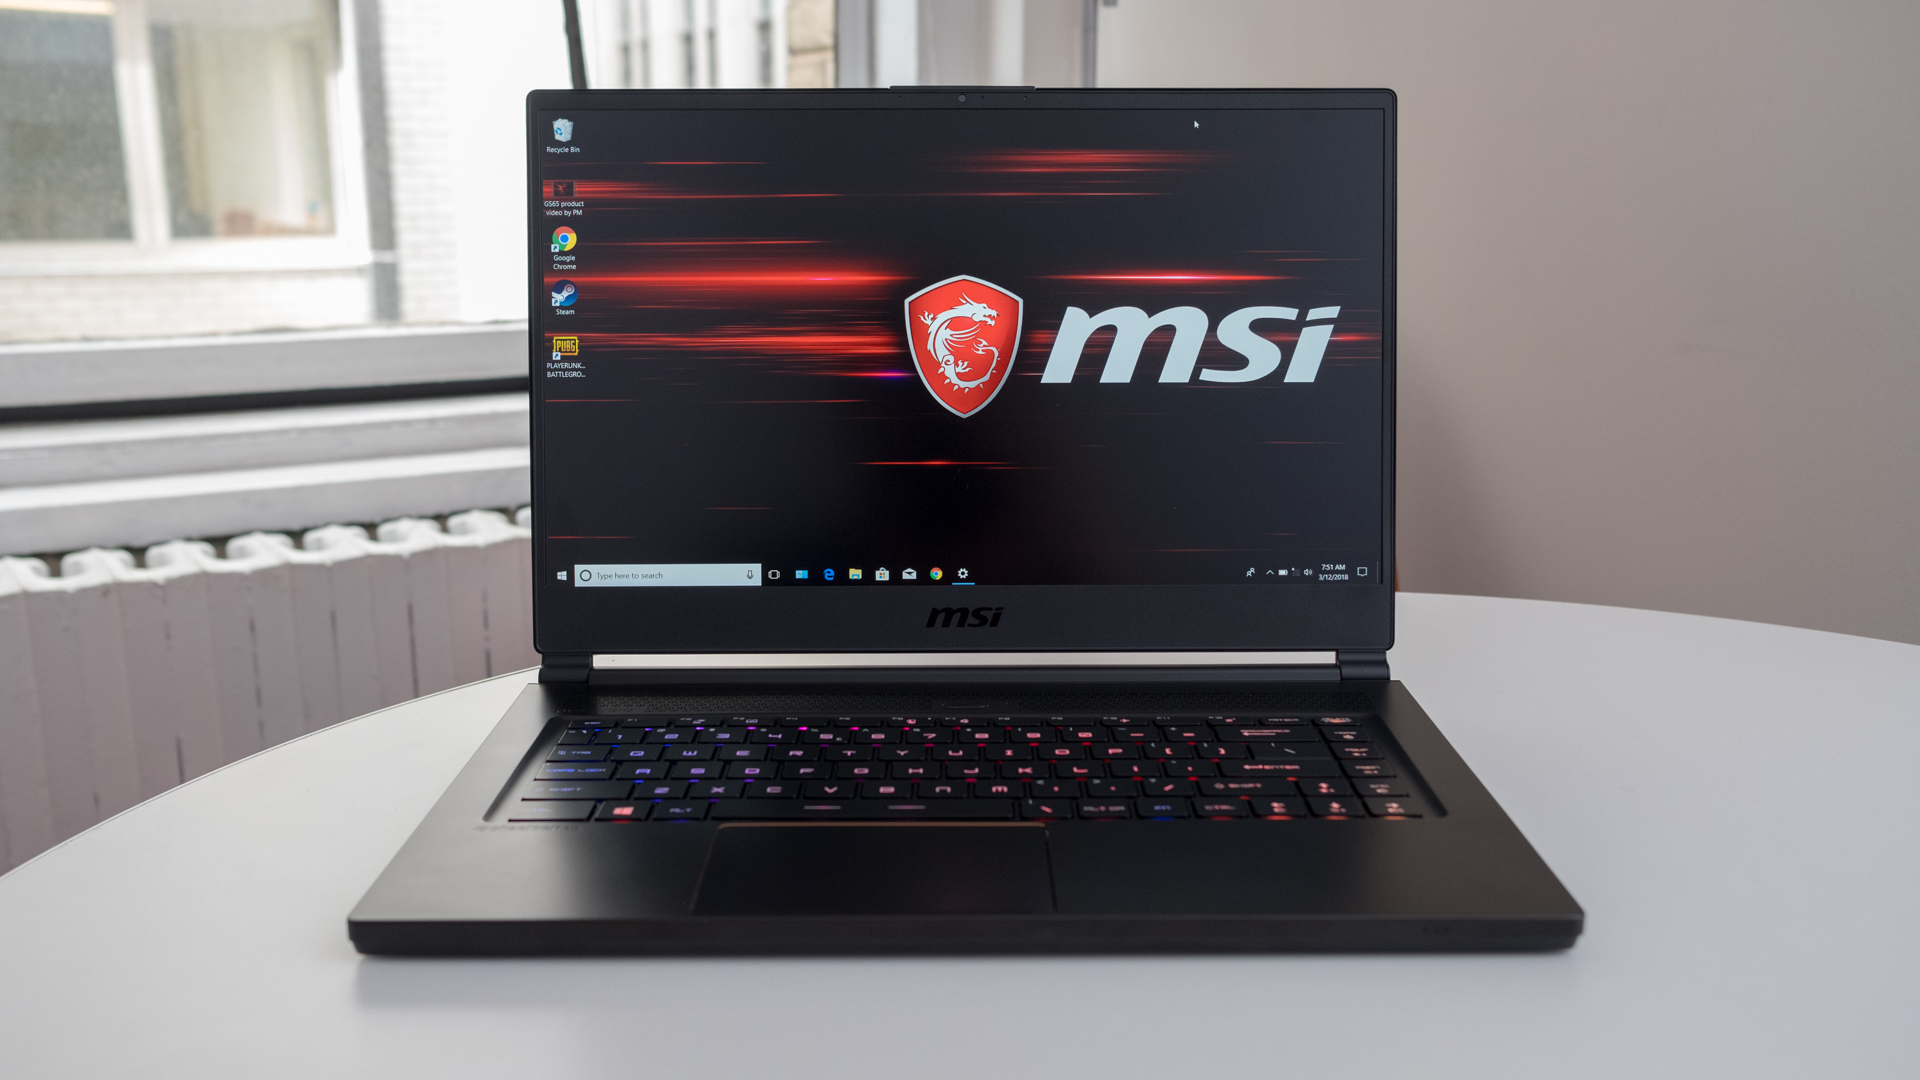 Best 15-inch laptop: MSI GS65 Stealth